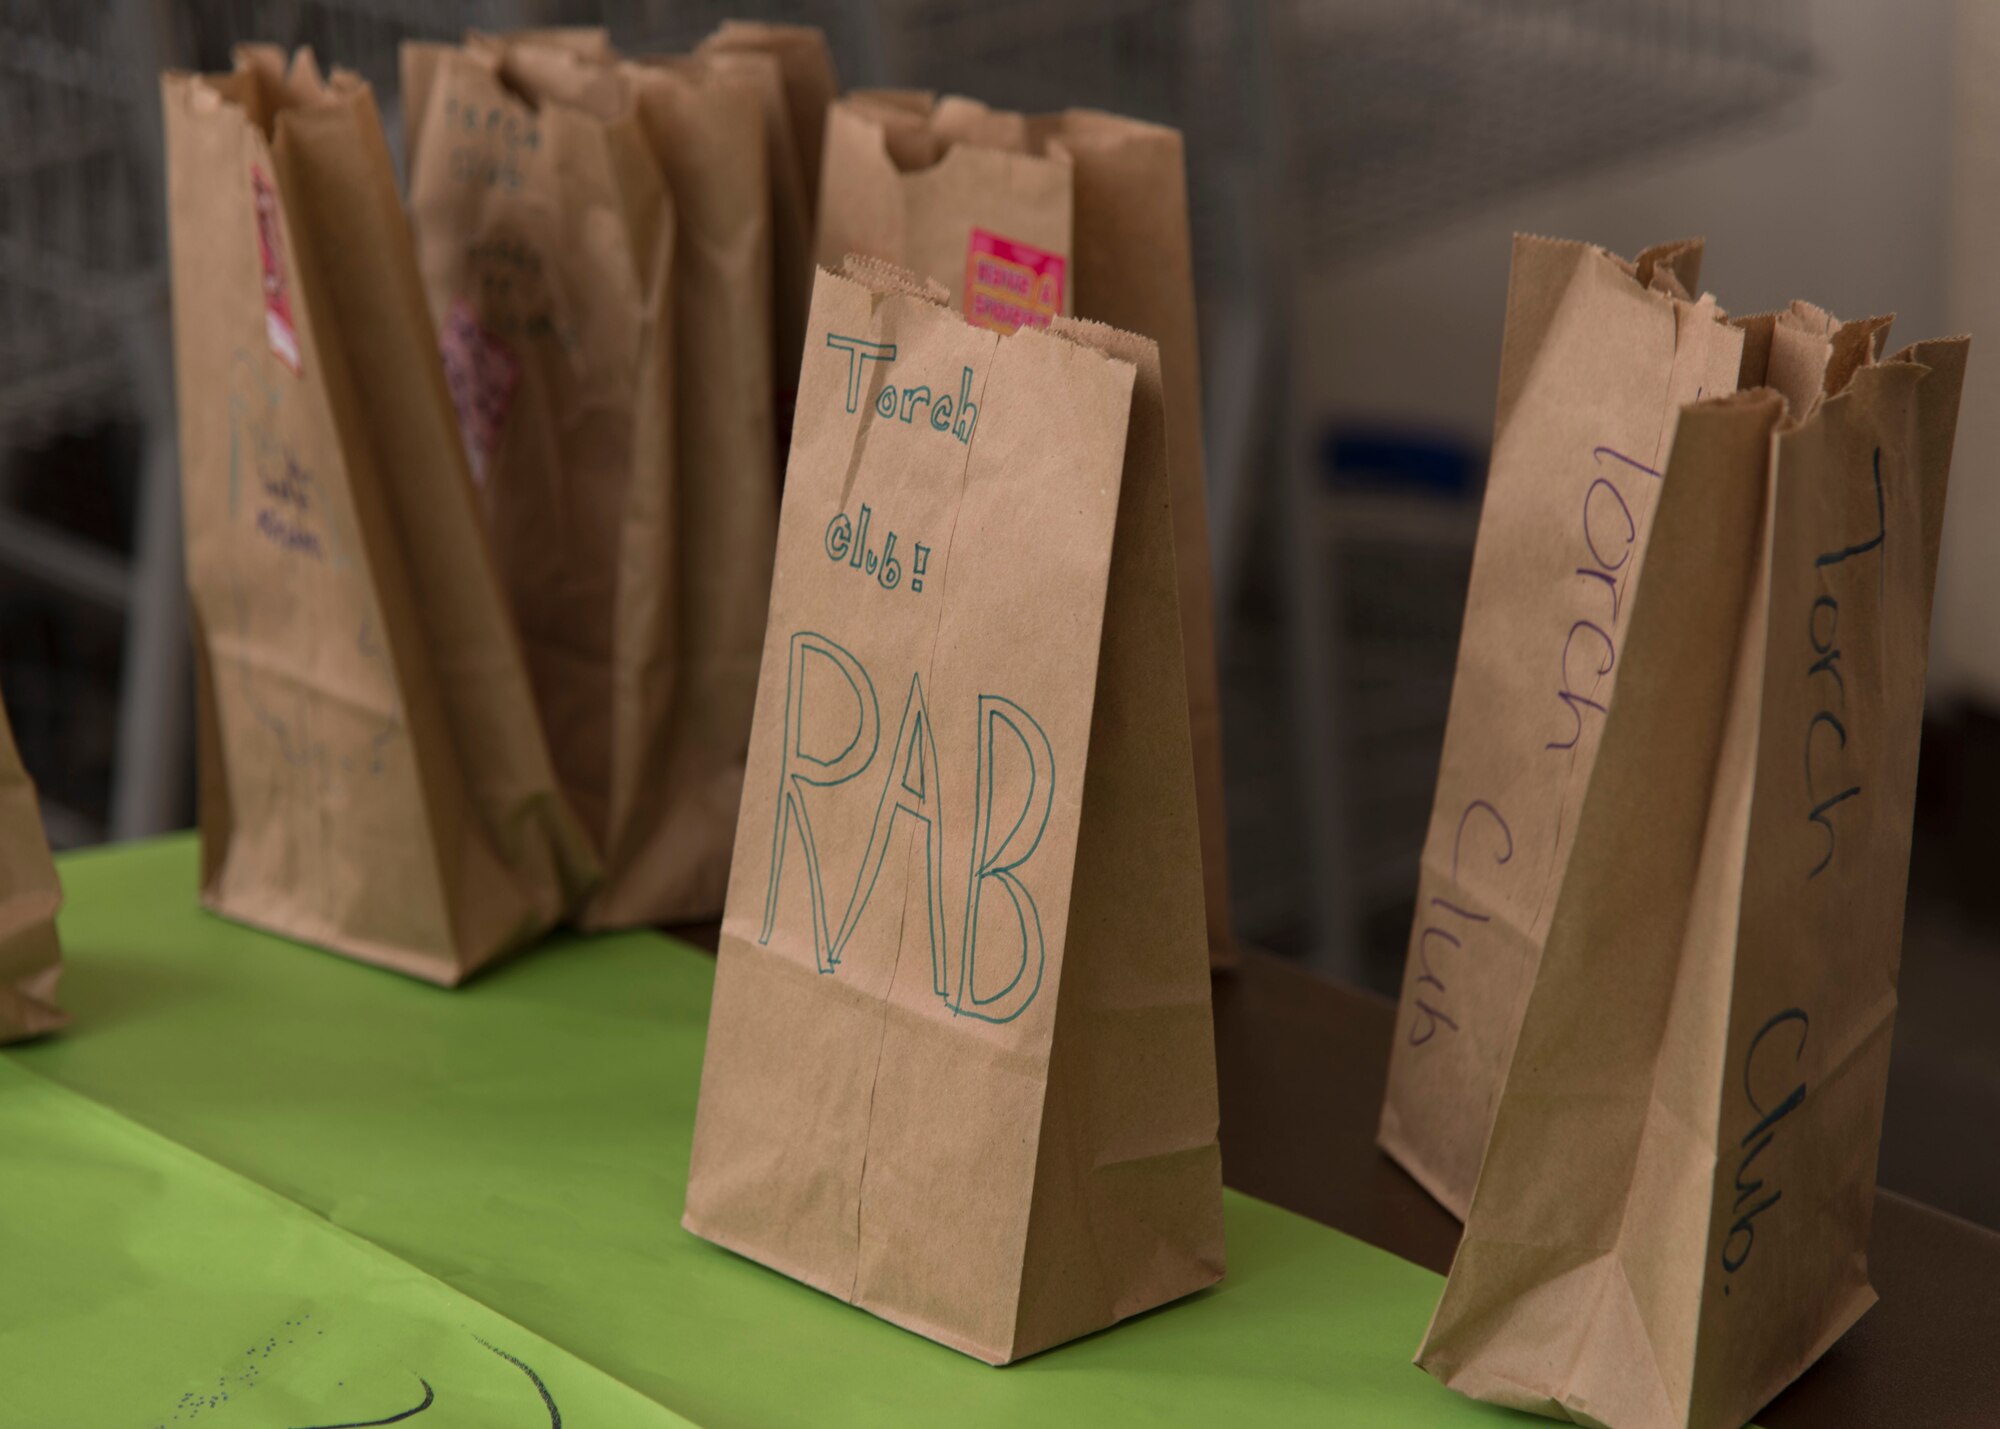 Gift bags decorated by members of Ramstein’s Boys and Girls Club of America Torch Club are handed out on Ramstein Air Base, Germany, March 7, 2018. These small bags, containing gardening accessories, candy, and more, were used to show acts of kindness and to give back to the community. (U.S. Air Force photo by Airman 1st Class Kaylea Berry)